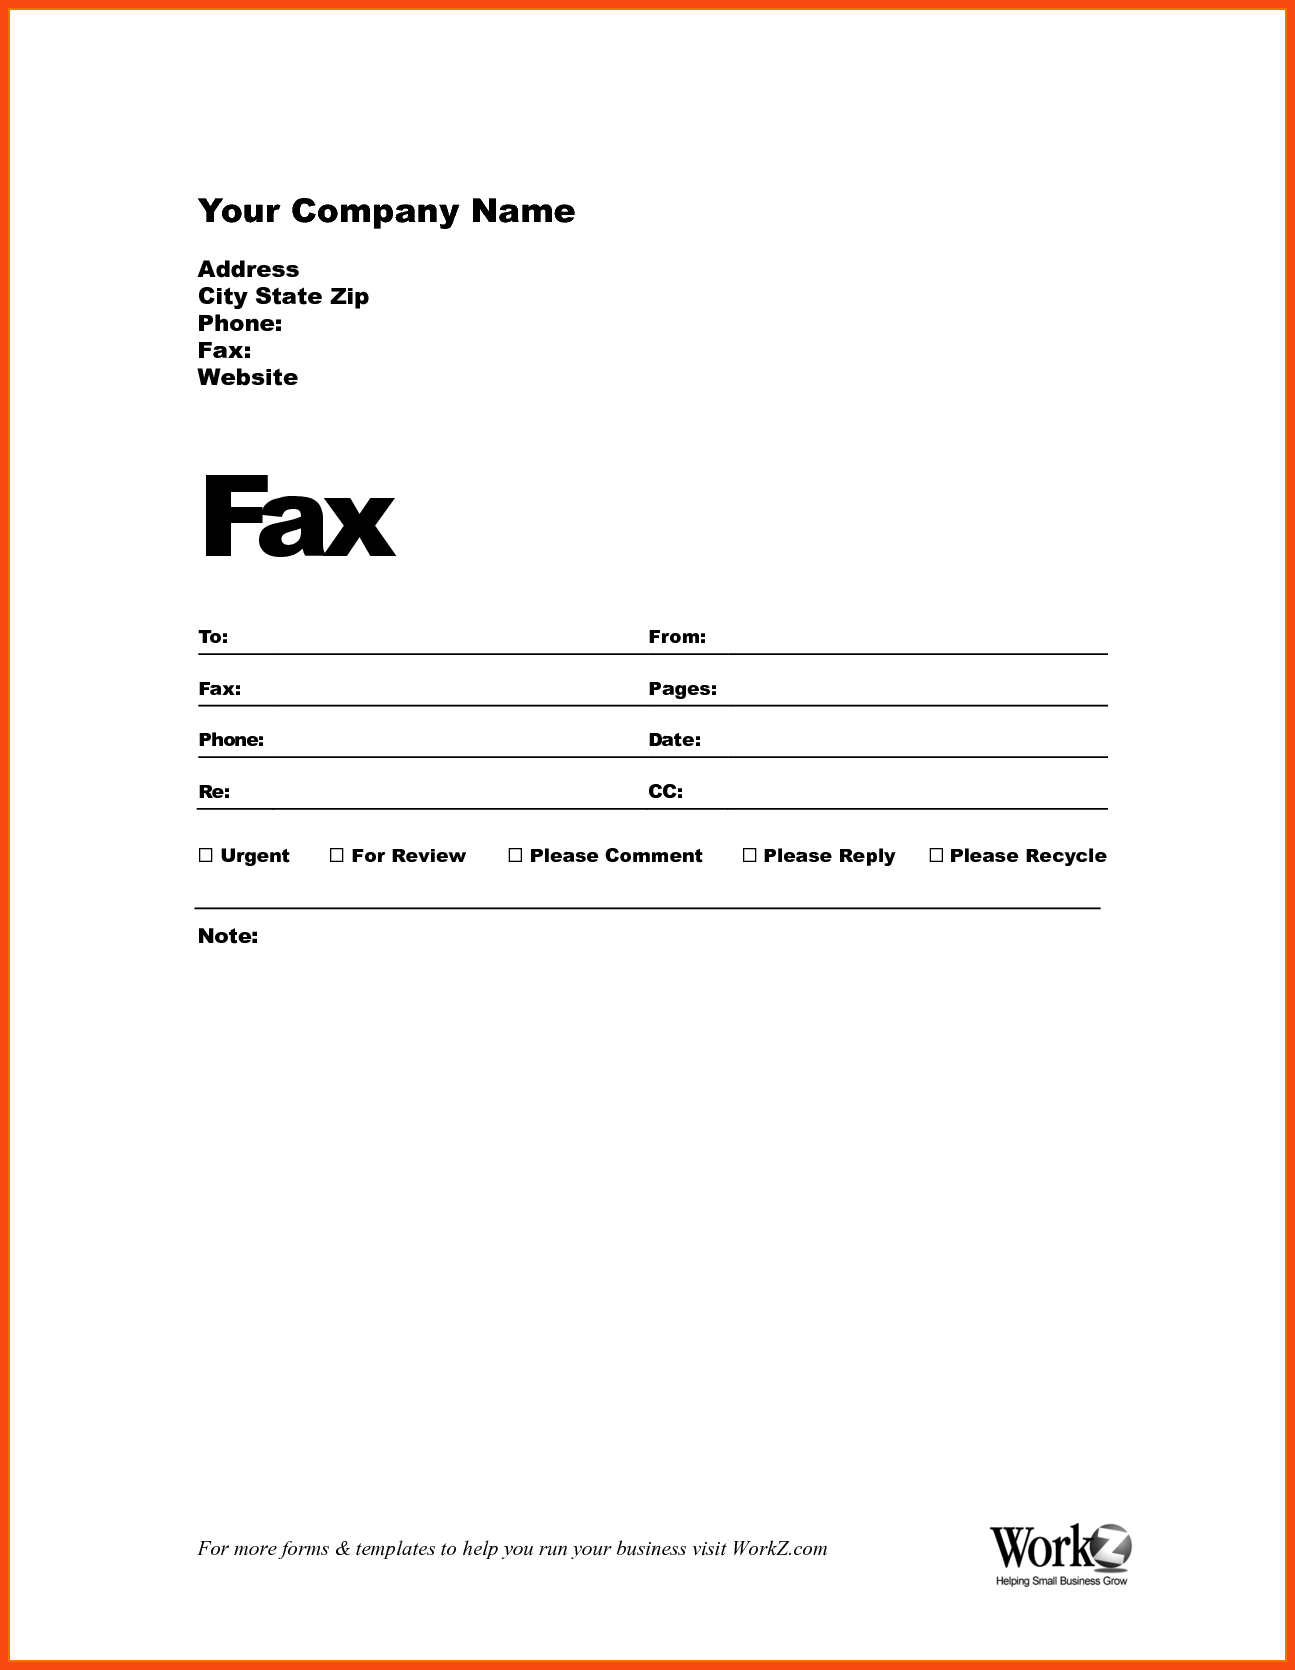 How To Fill Out A Fax Sheet Use A Custom Fax Cover Sheet With Online 